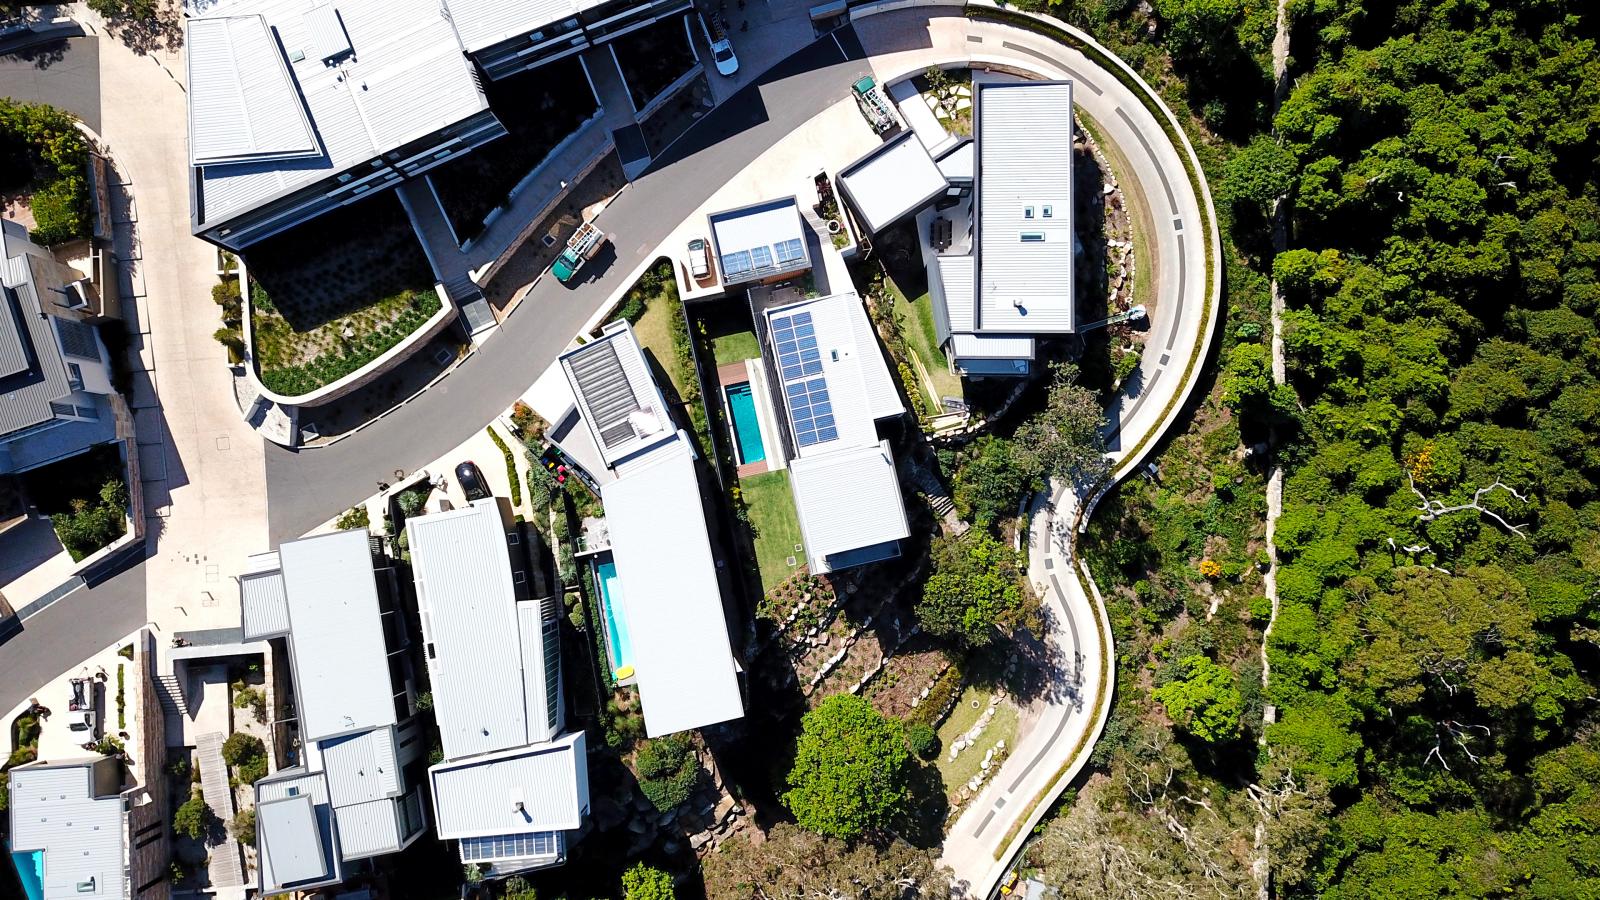 Aerial view of the modern residential neighborhood of Spring Cove, featuring several white-roofed houses. Some homes boast swimming pools. A winding road separates the neighborhood from a densely forested area, while neat, parallel rows of houses enhance the tranquility of Manly's scenic beauty.